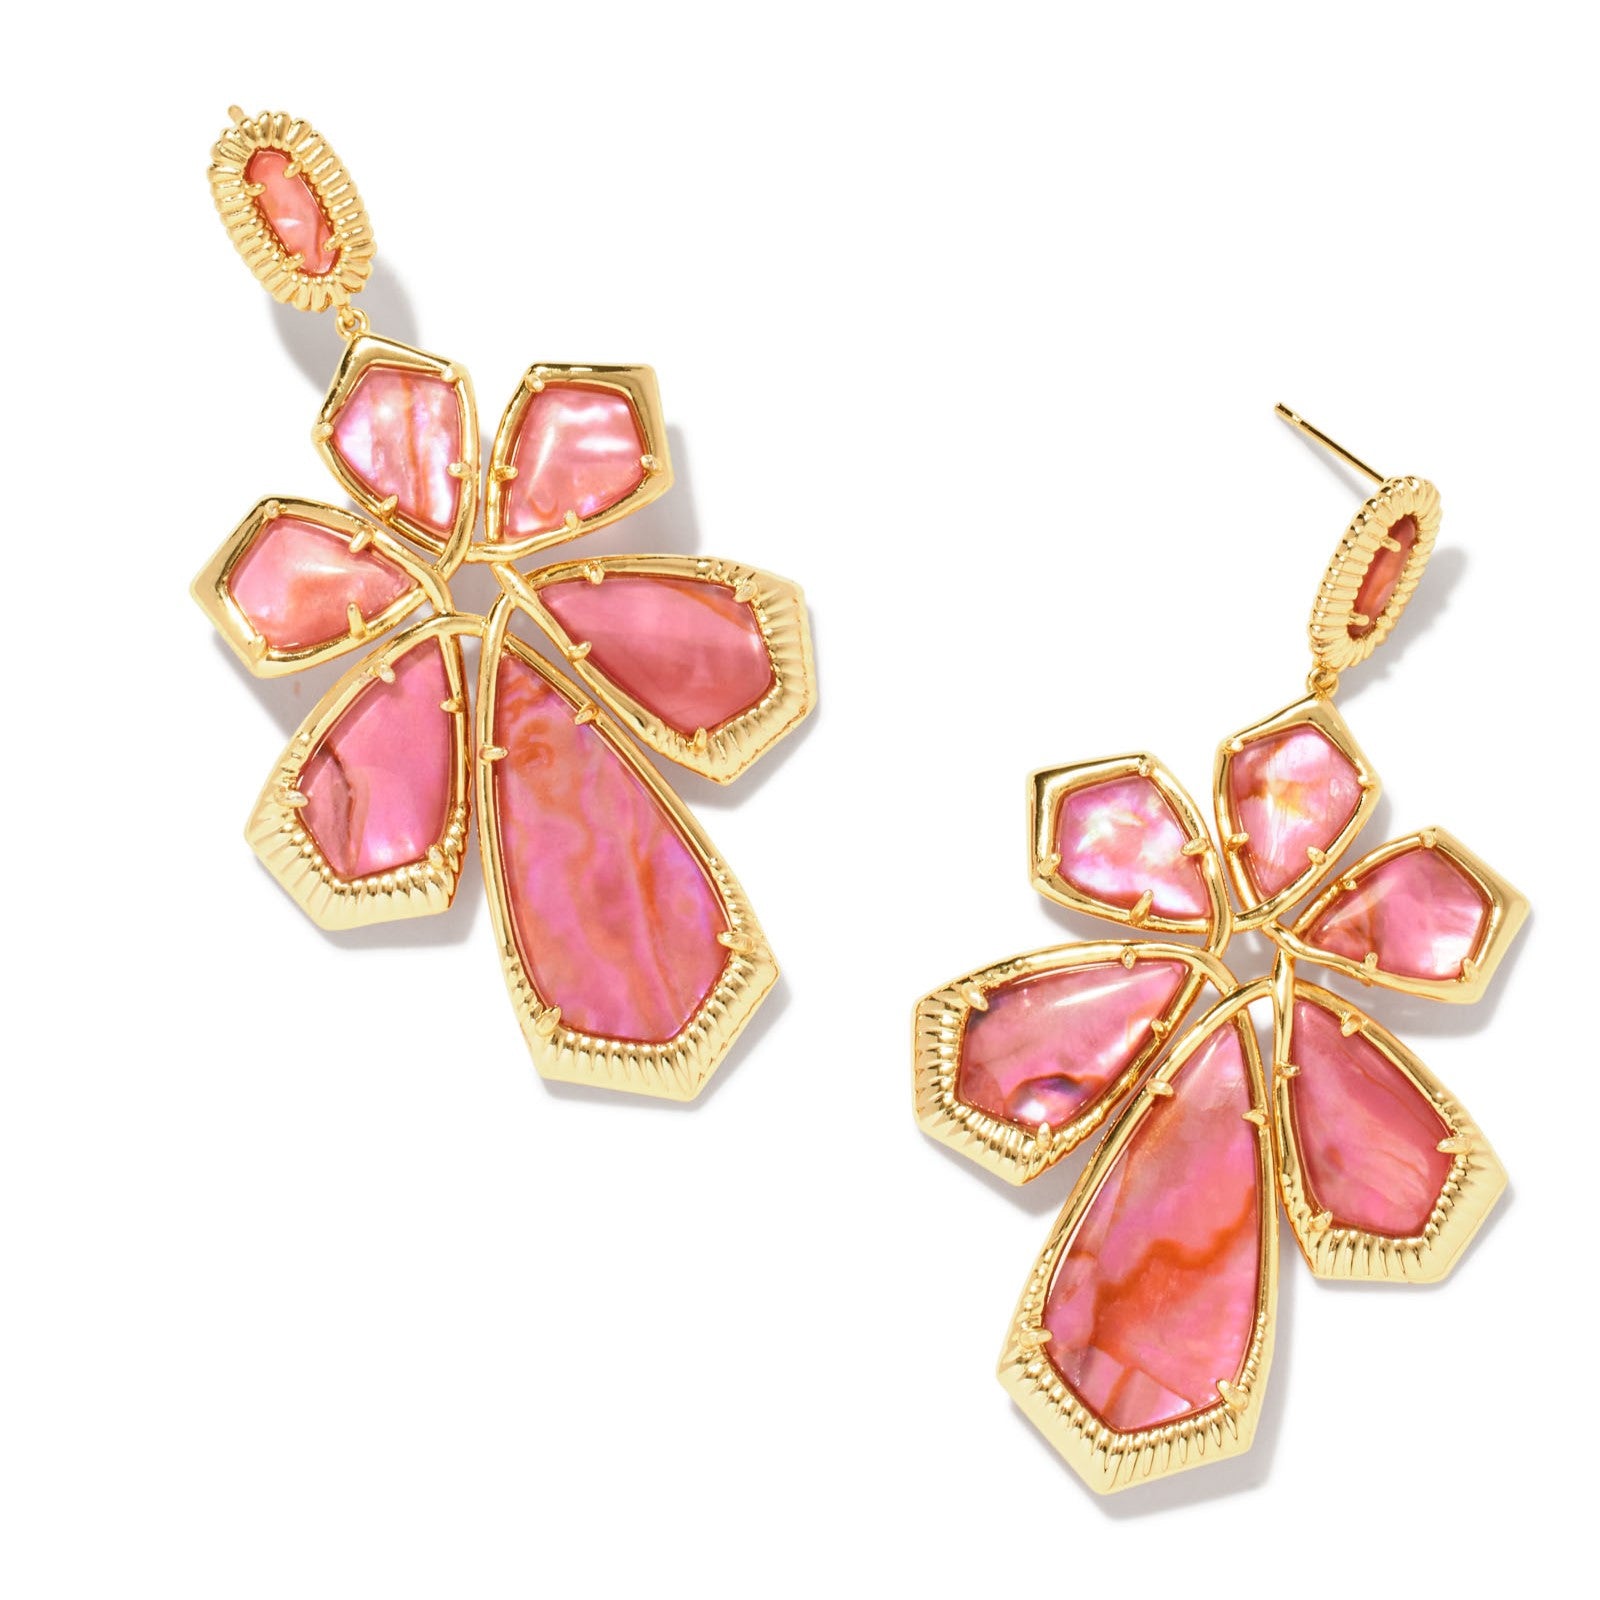 Kendra Scott | Layne Gold Statement Earrings in Light Pink Iridescent Abalone - Giddy Up Glamour Boutique